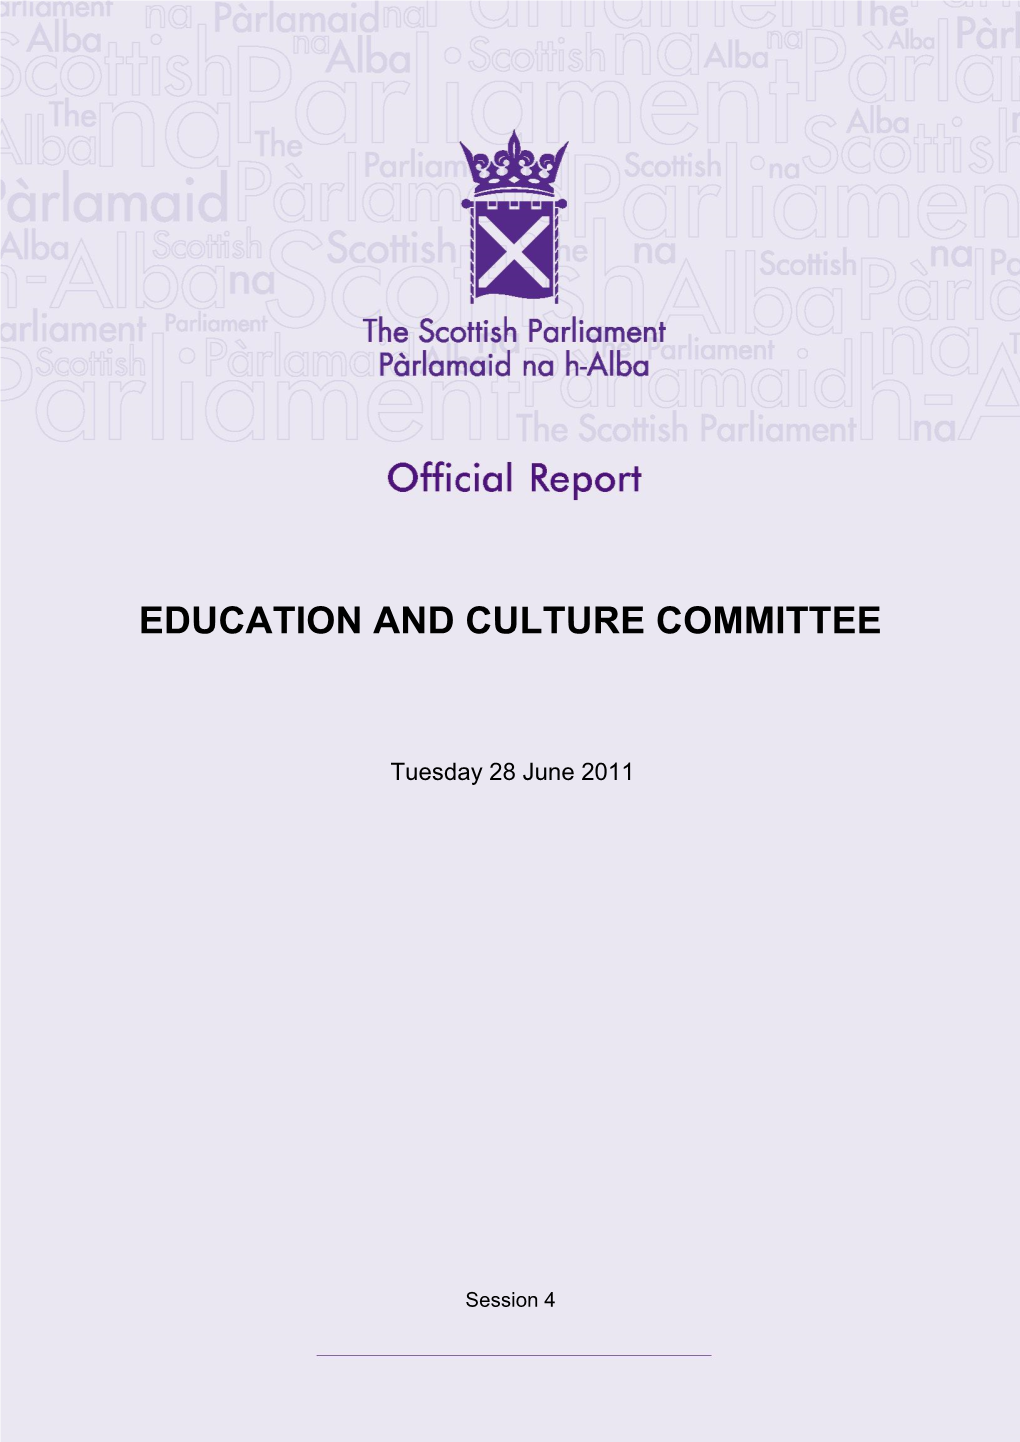 Education and Culture Committee